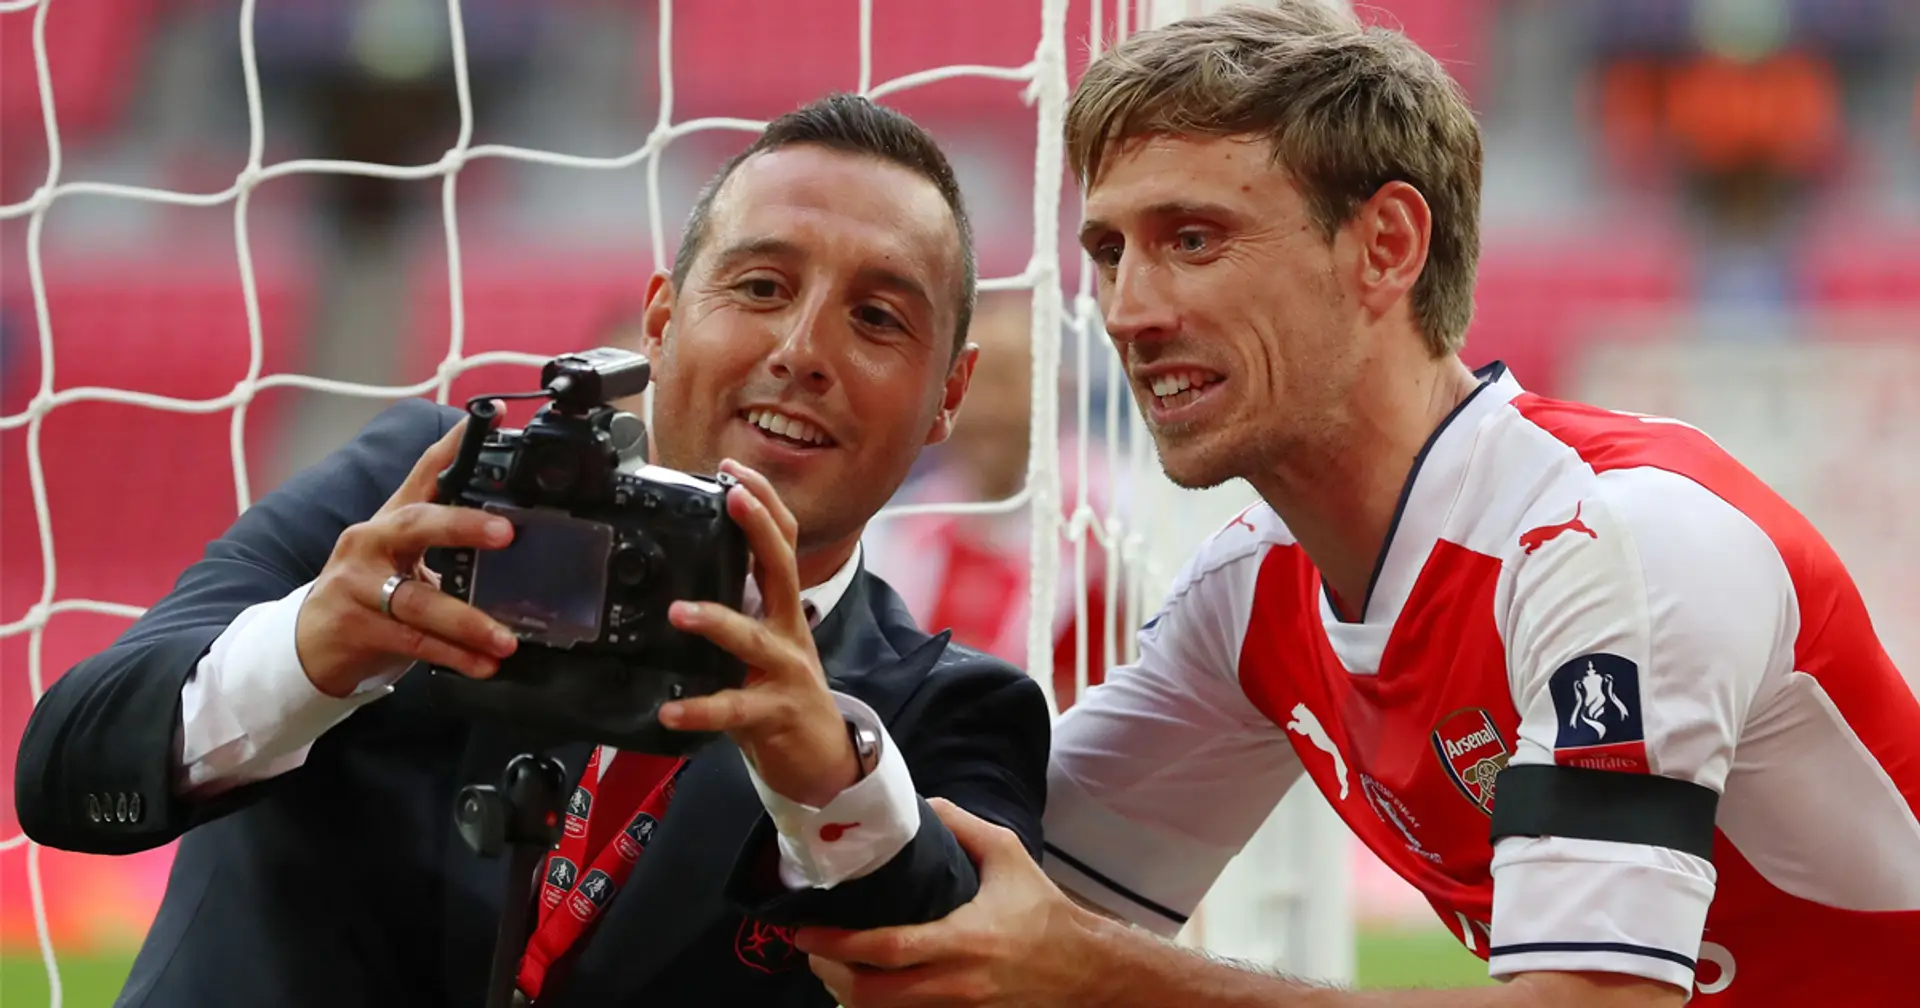 'I don’t know if he got a commission': Monreal on how Cazorla facilitated his move to Arsenal